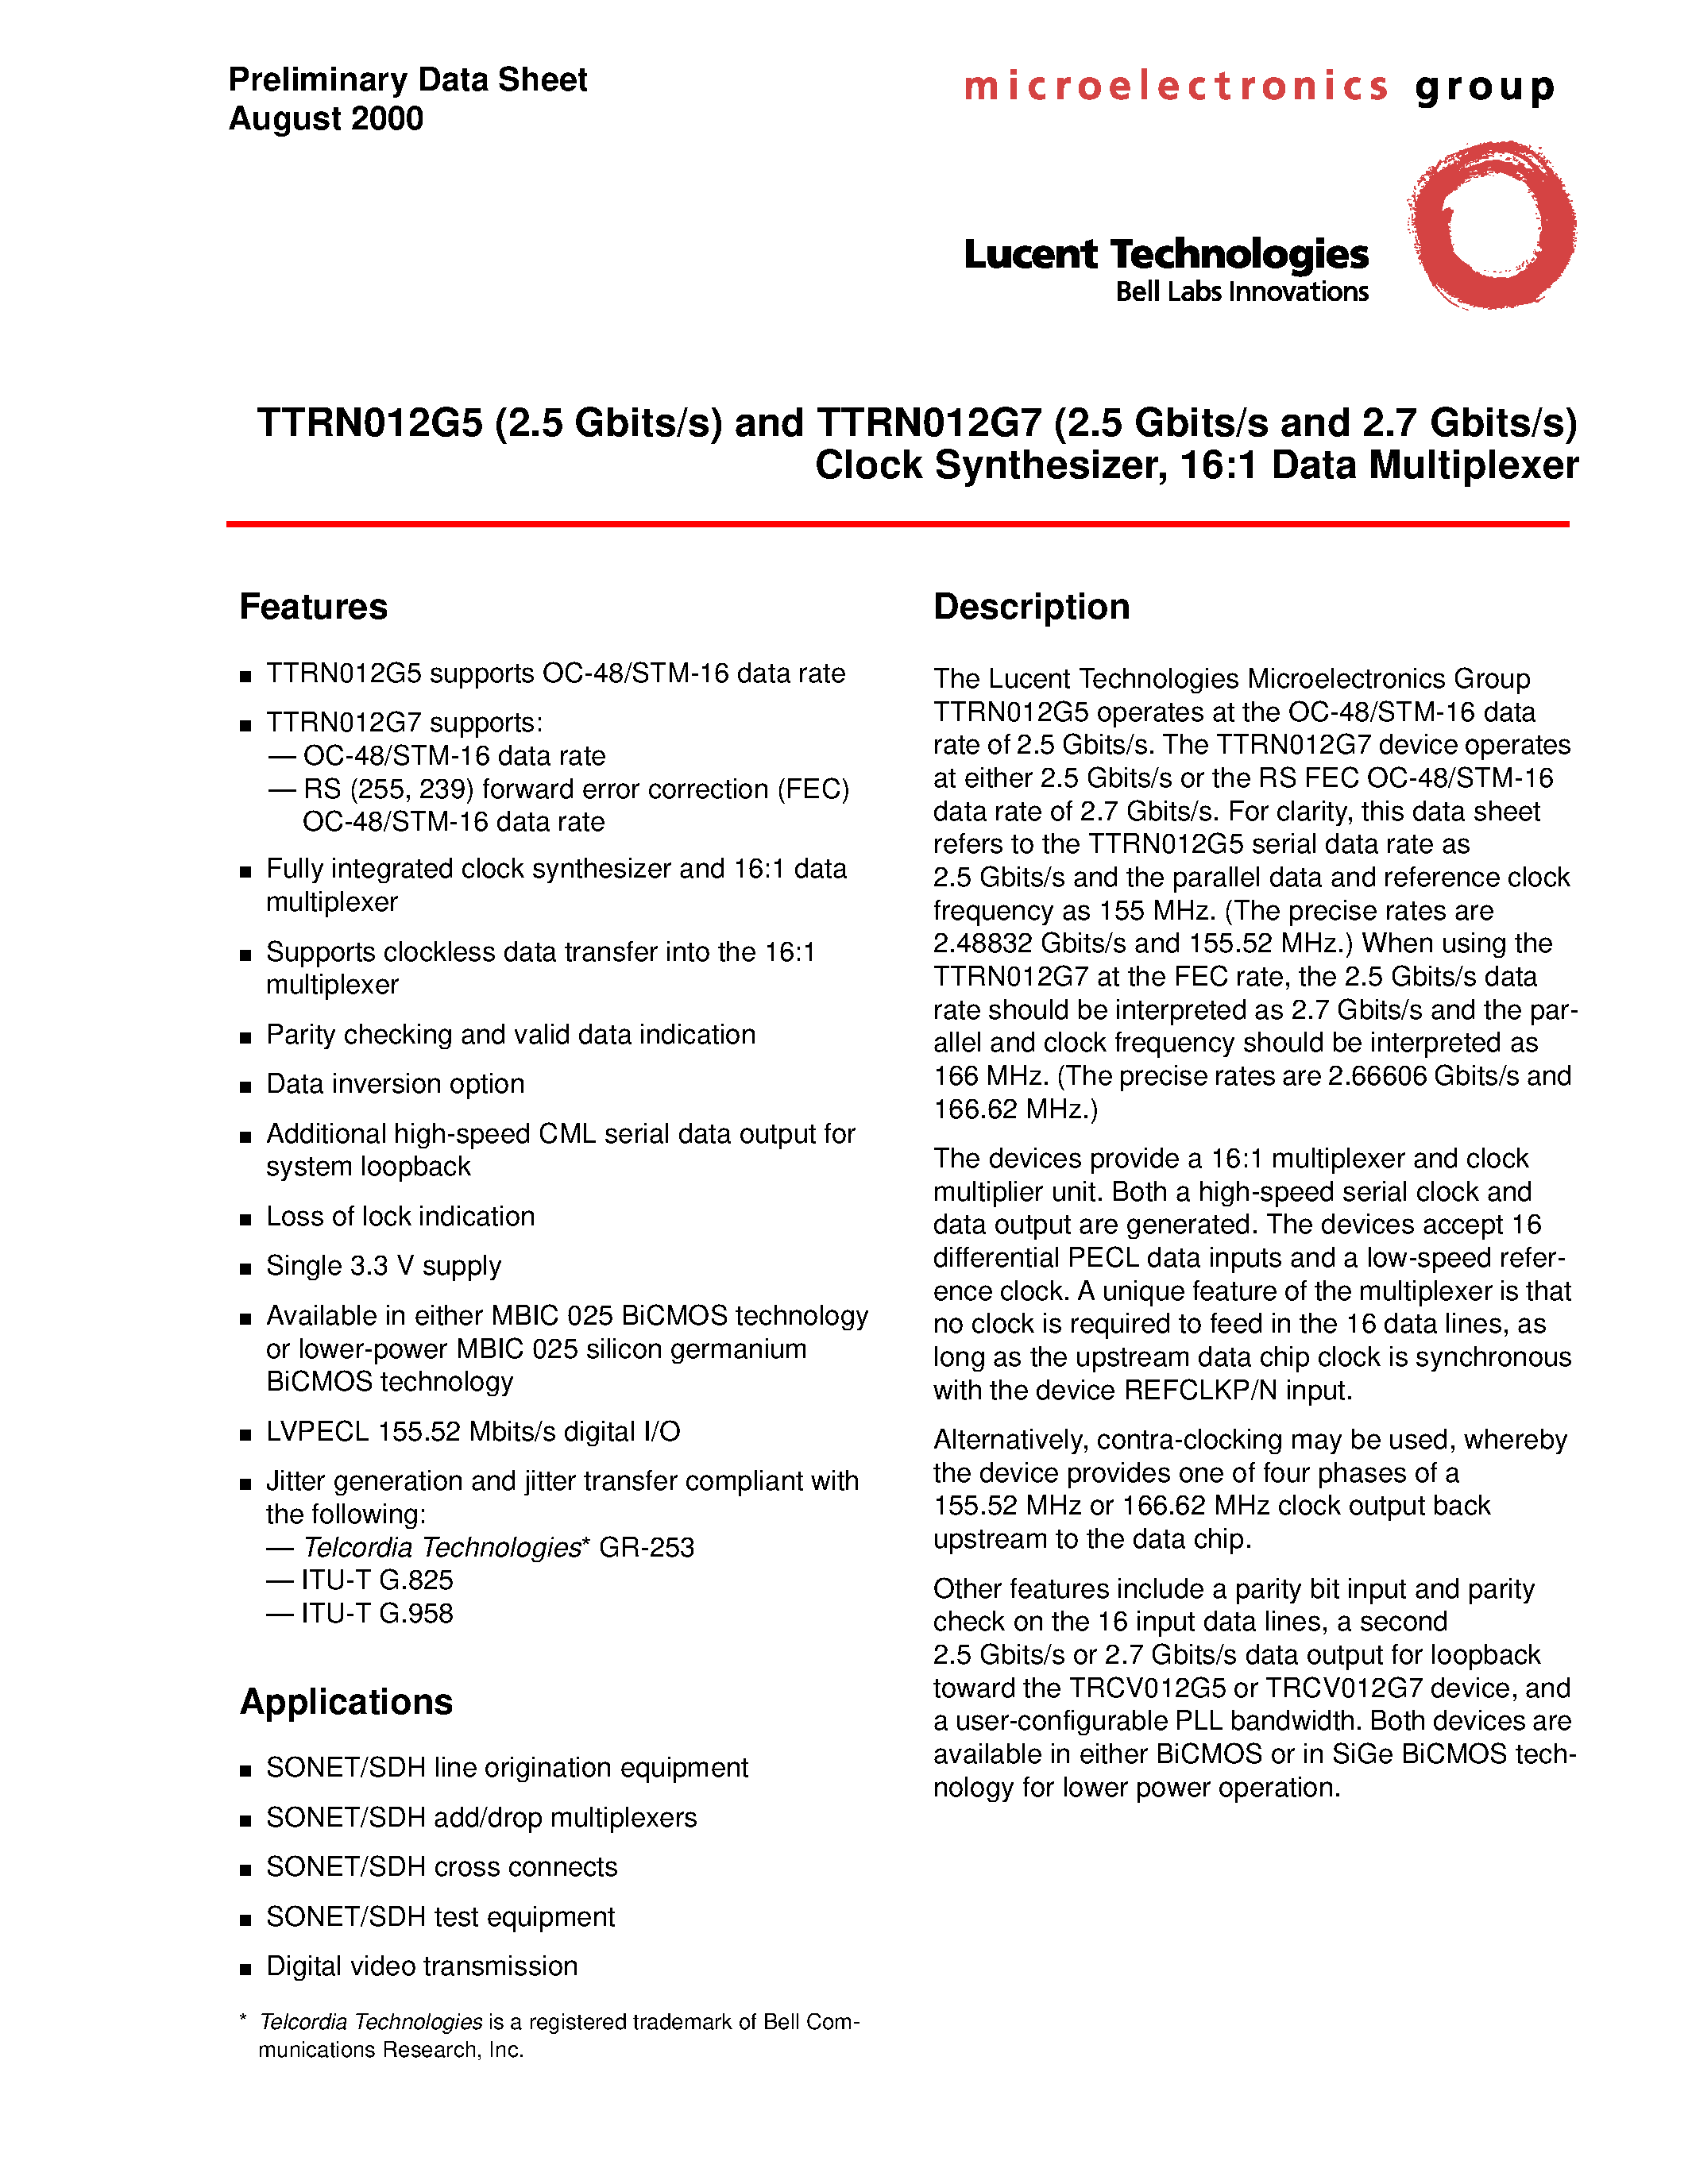 Datasheet TTRN012G5 - TTRN012G5 (2.5 Gbits/s) and TTRN012G7 (2.5 Gbits/s and 2.7 Gbits/s) Clock Synthesizer/ 16:1 Data Multiplexer page 1